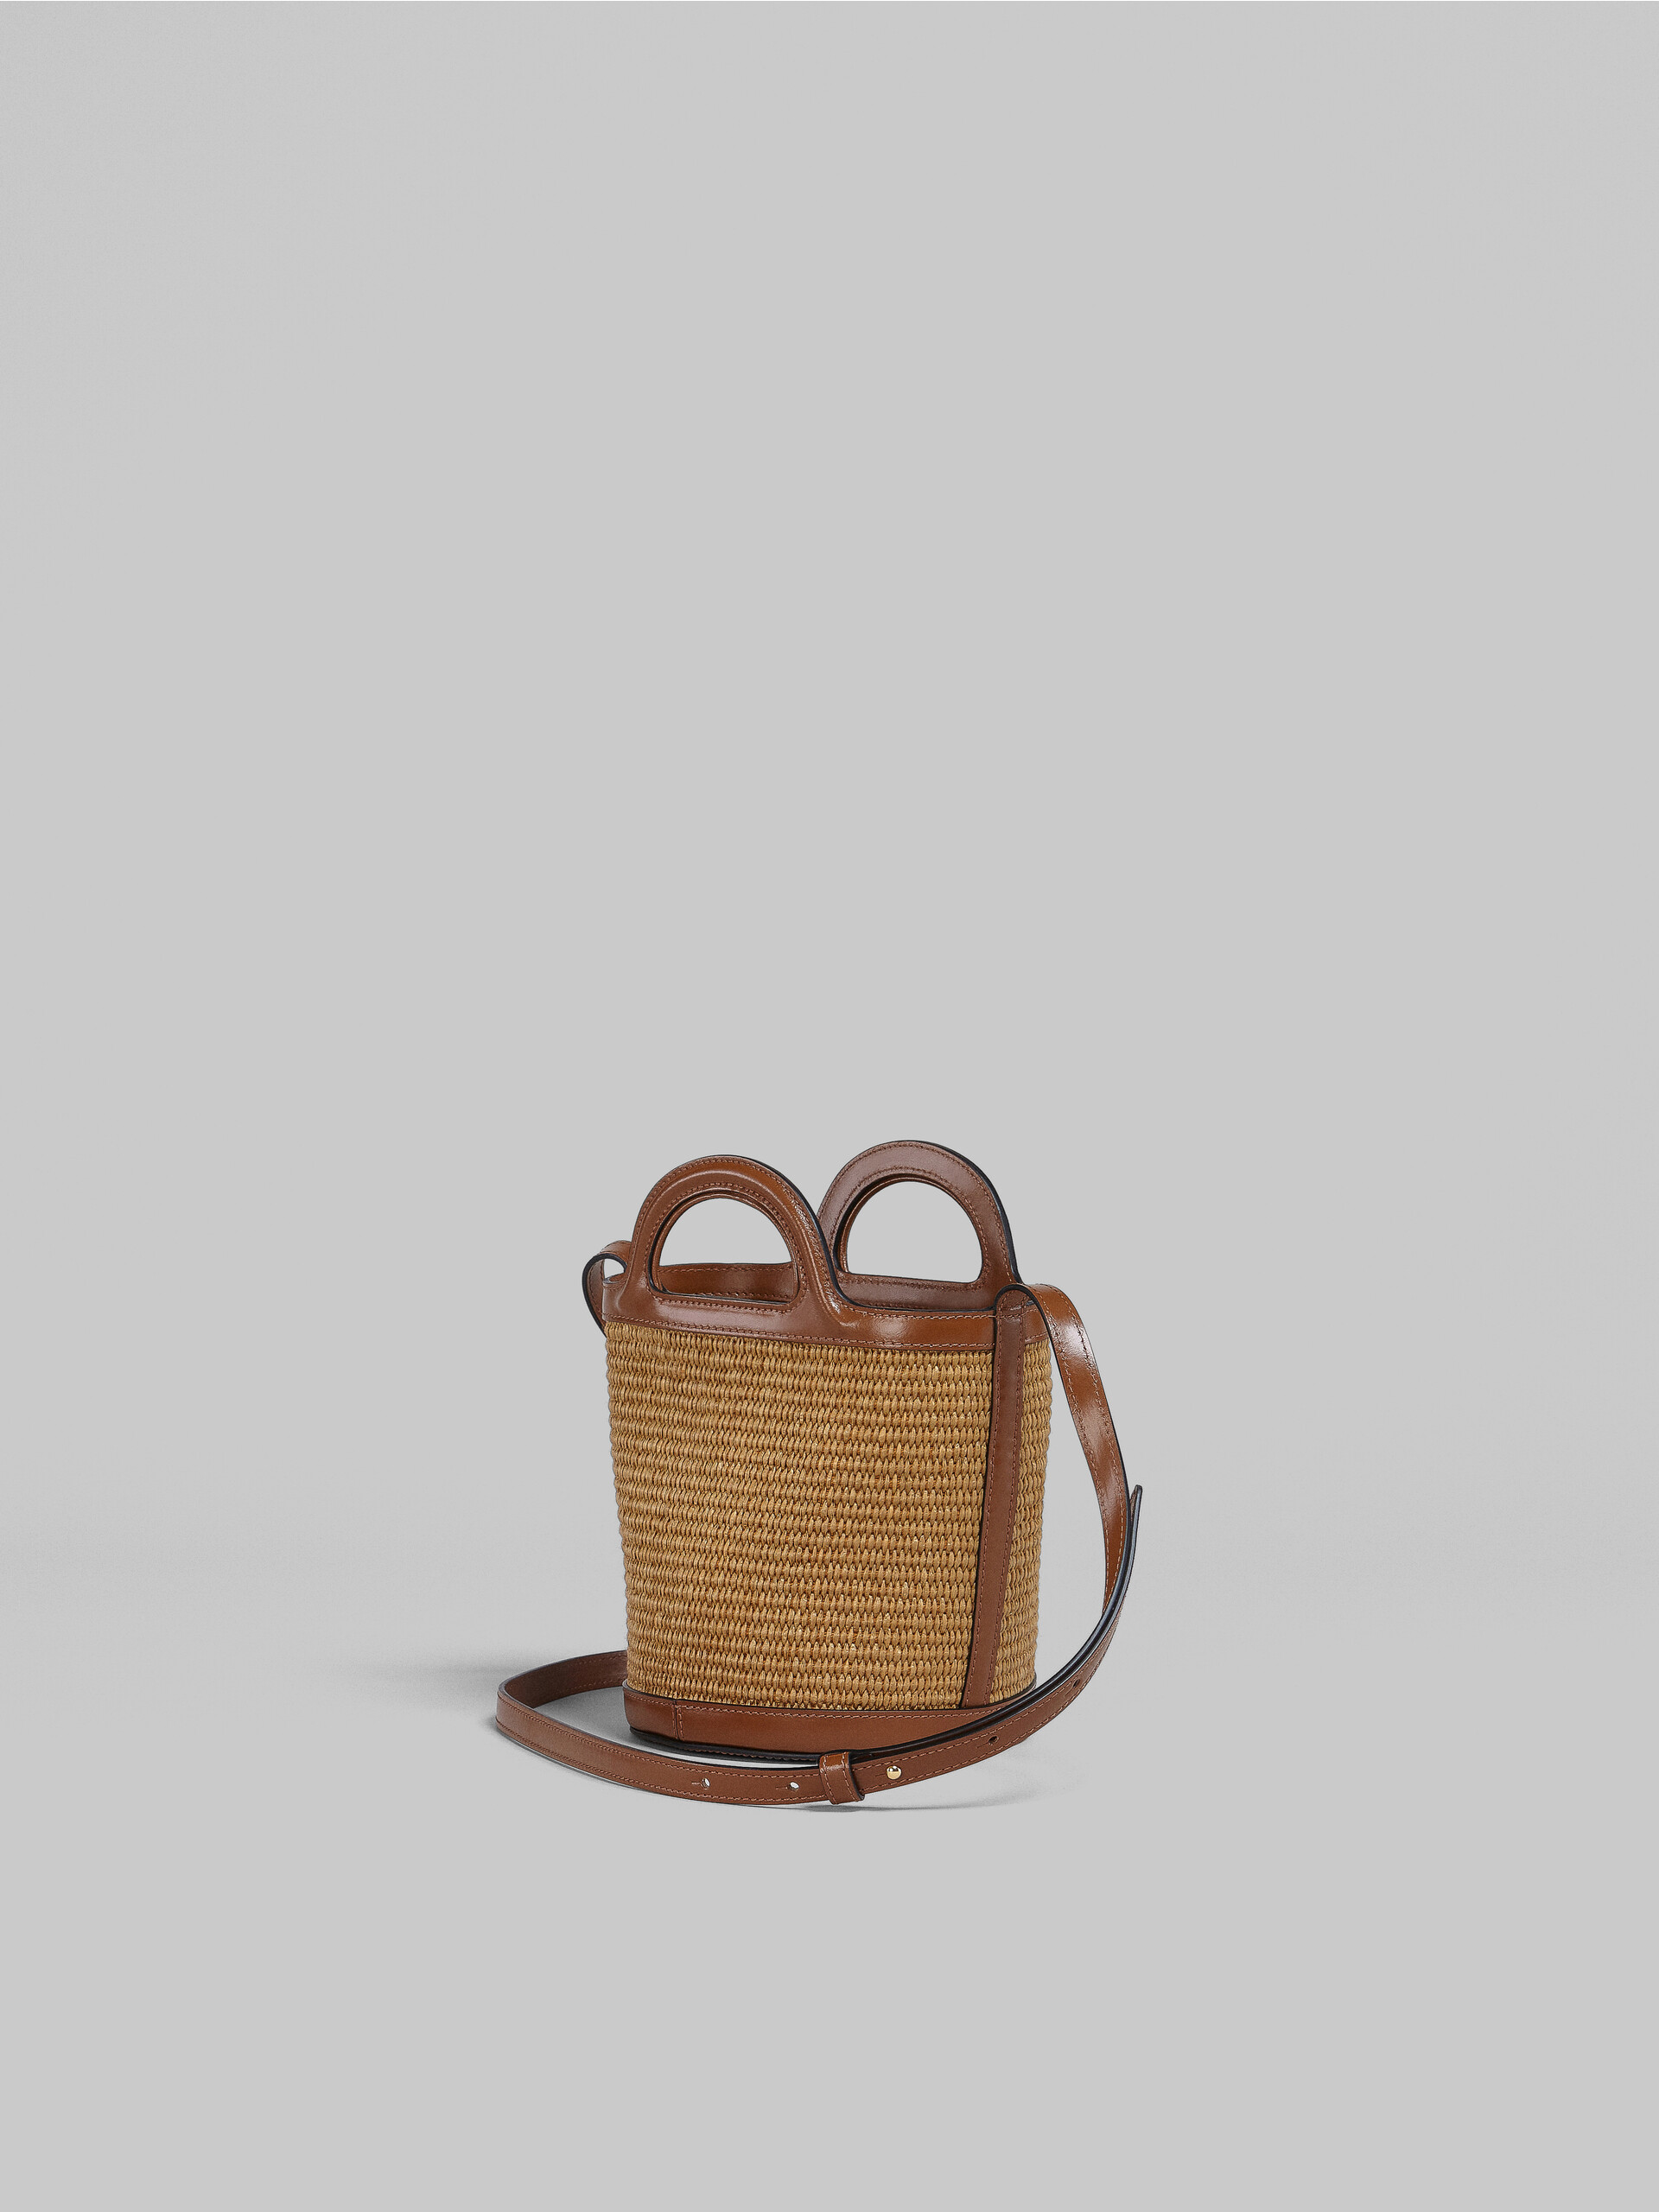 TROPICALIA mini bucket bag in brown leather and raffia - Shoulder Bags - Image 3